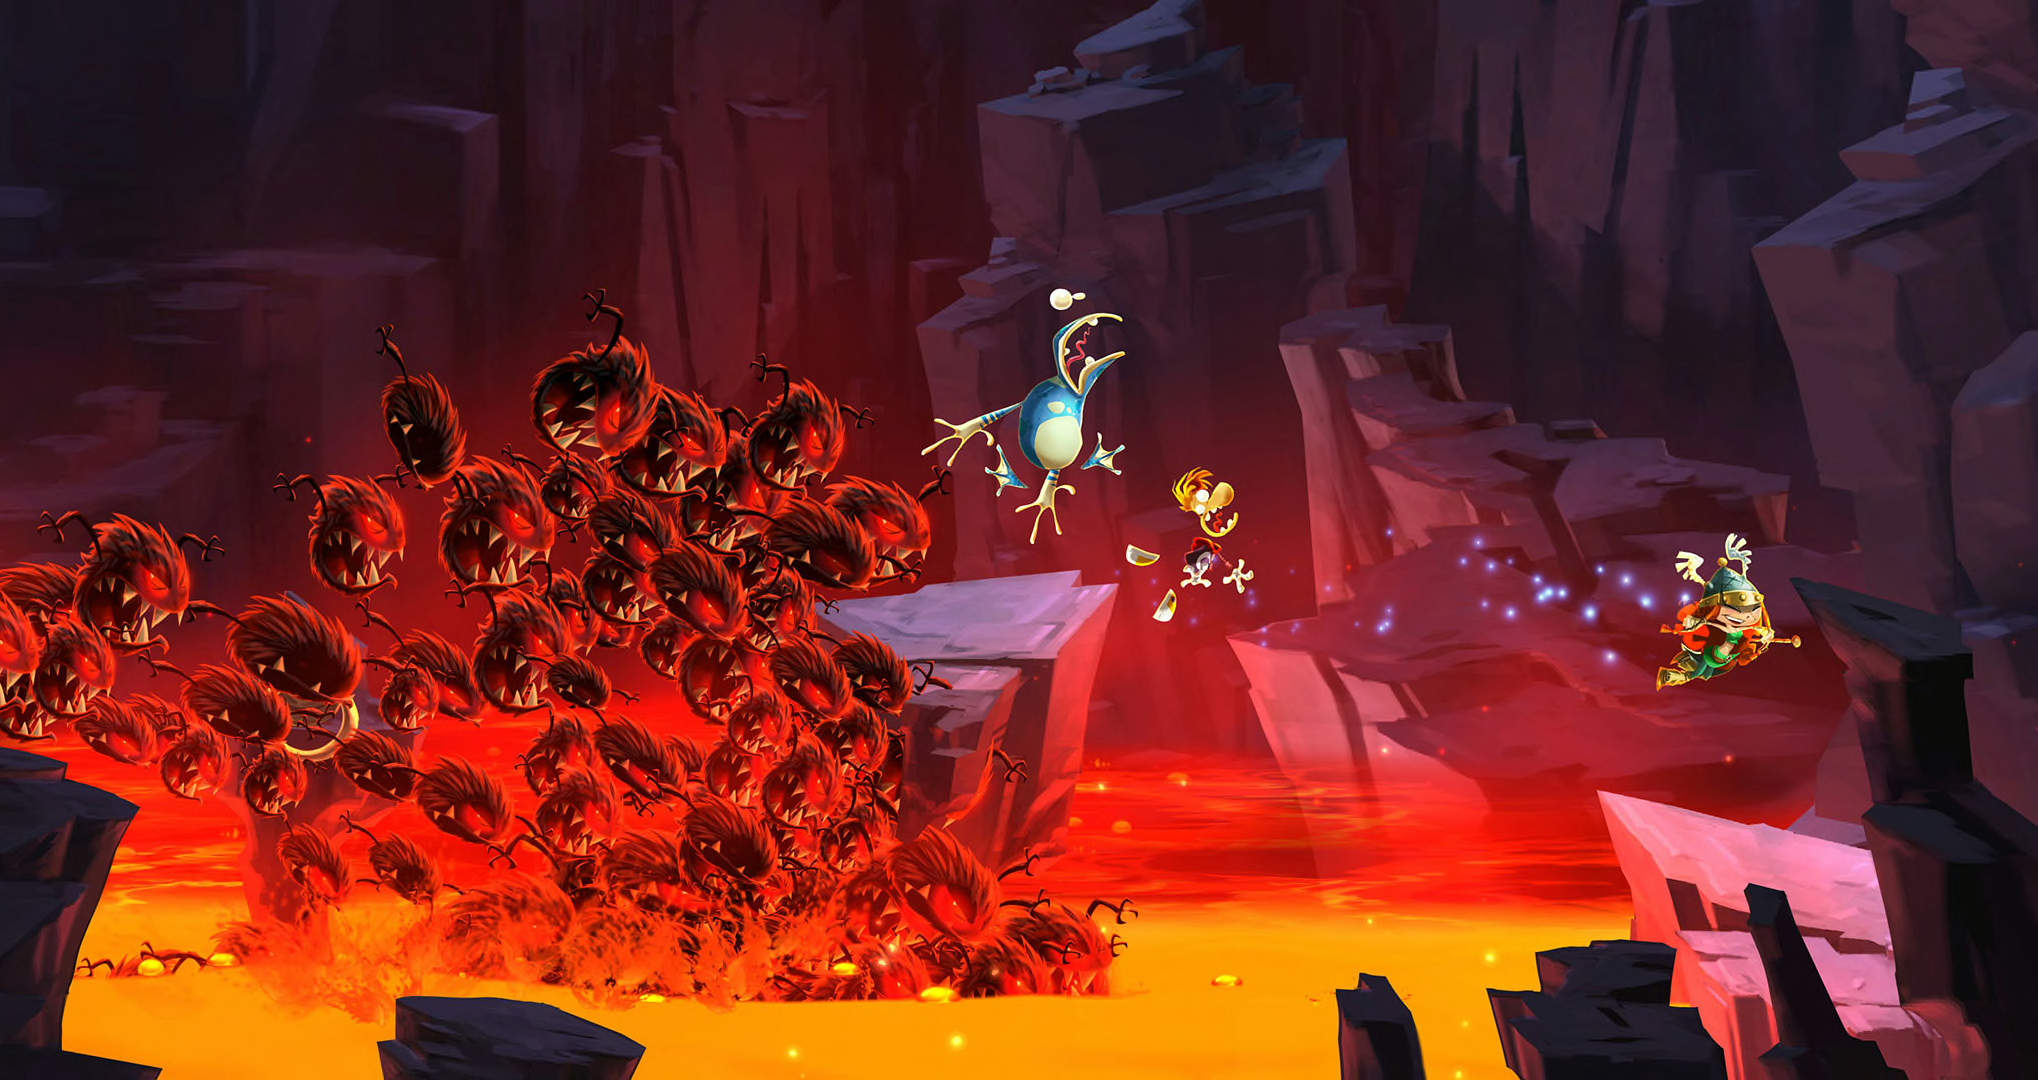 Review: Rayman Legends